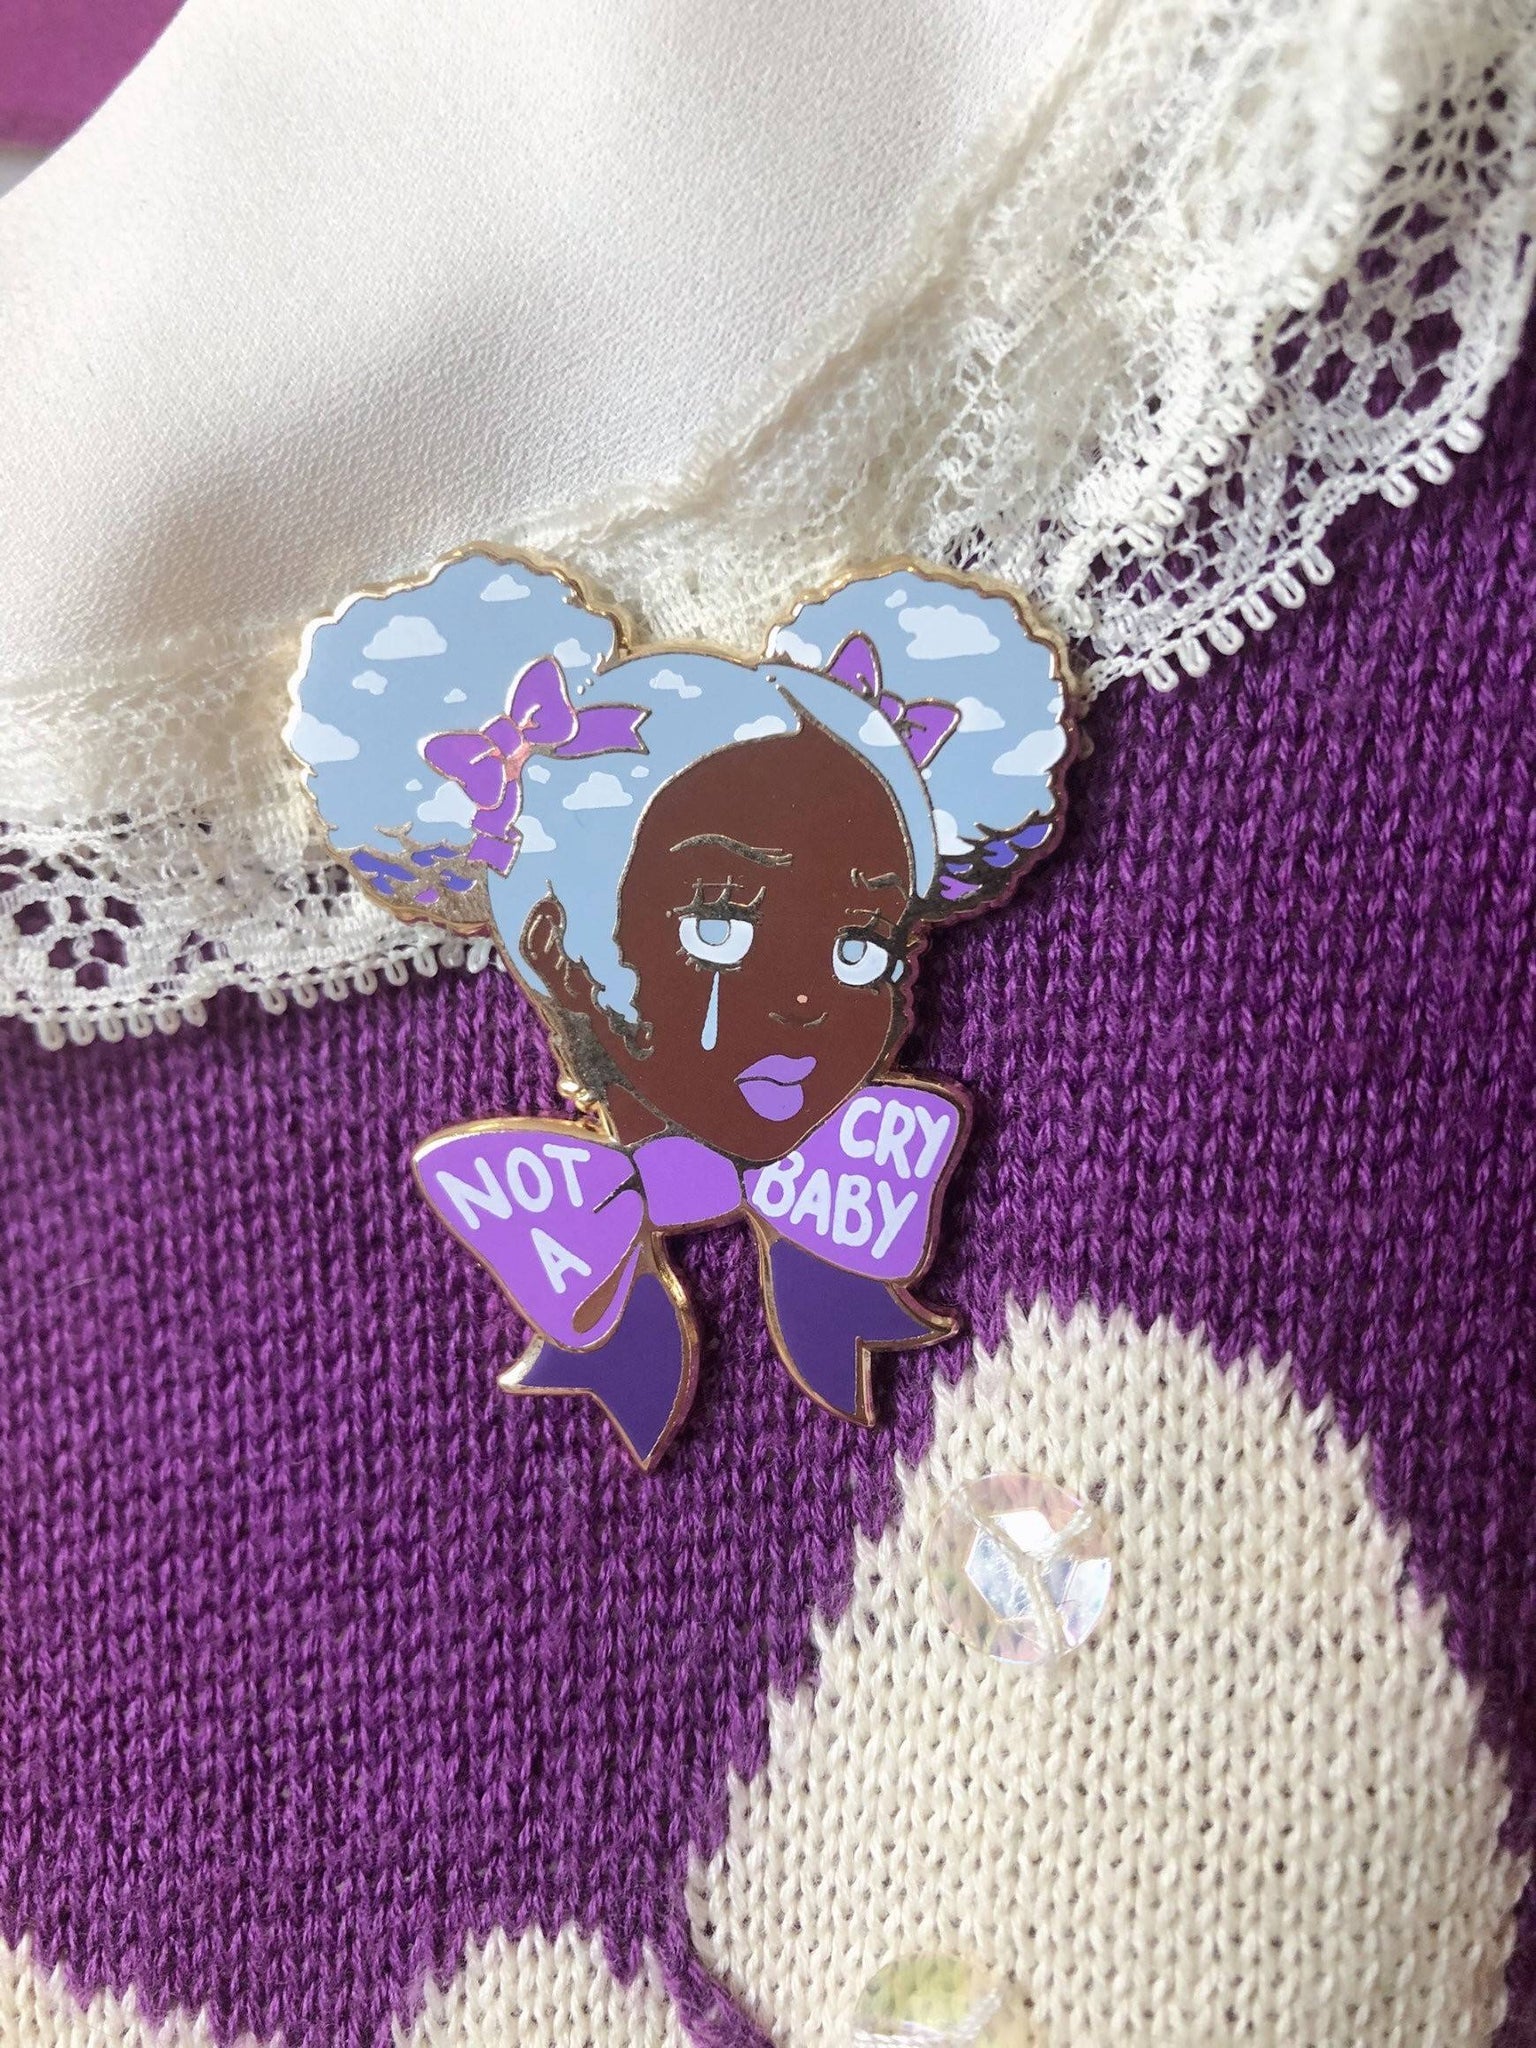 Not A Cry Baby enamel pin - Lolita Collective